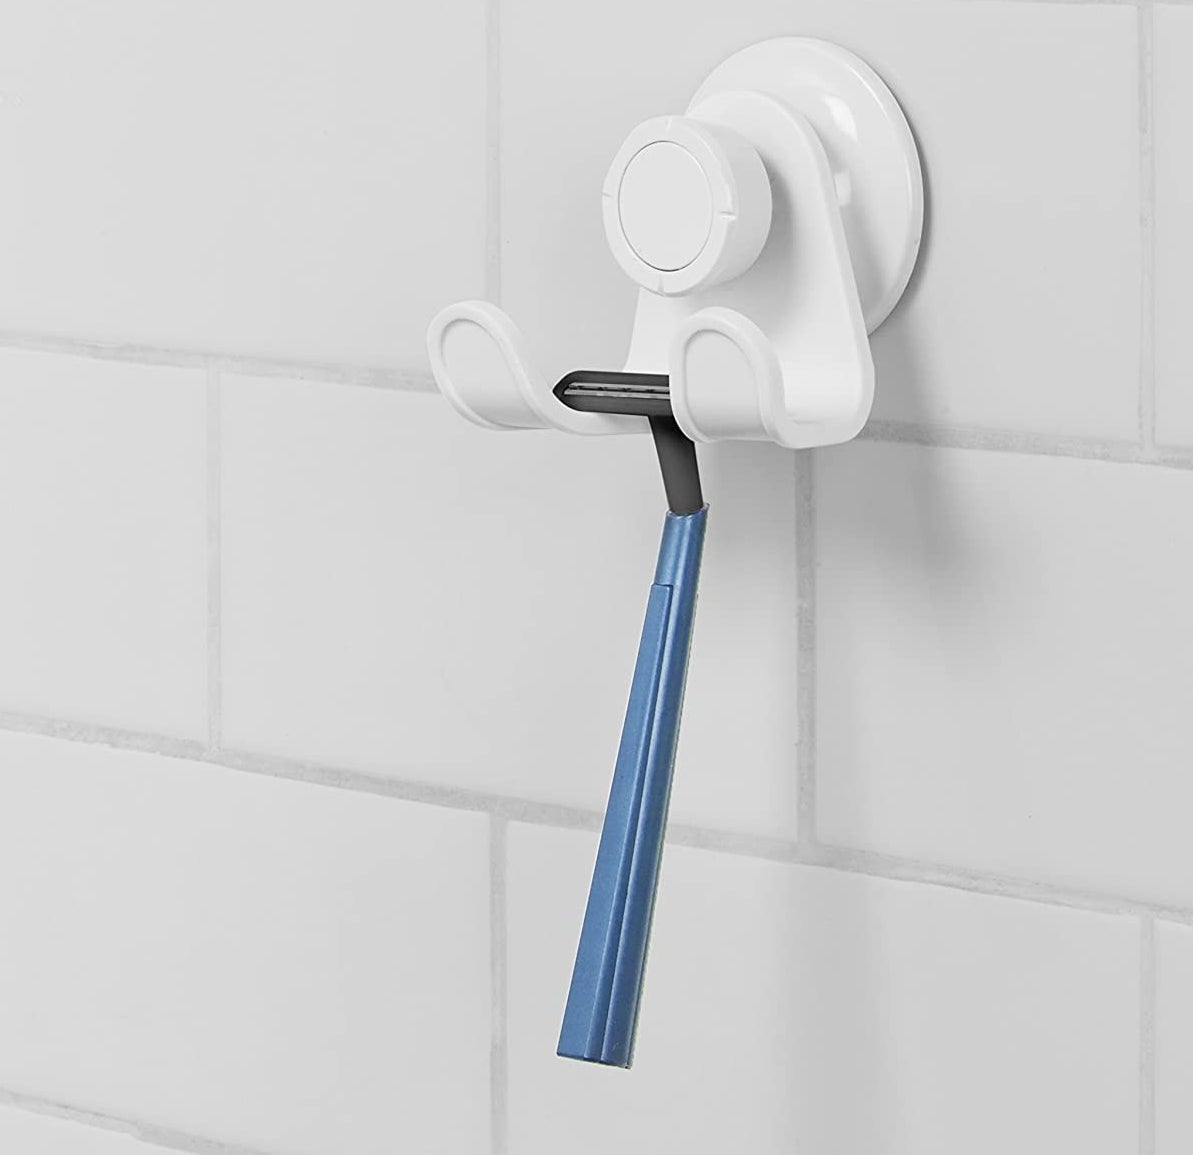 A razor hanging from a small hook on a bathroom wall